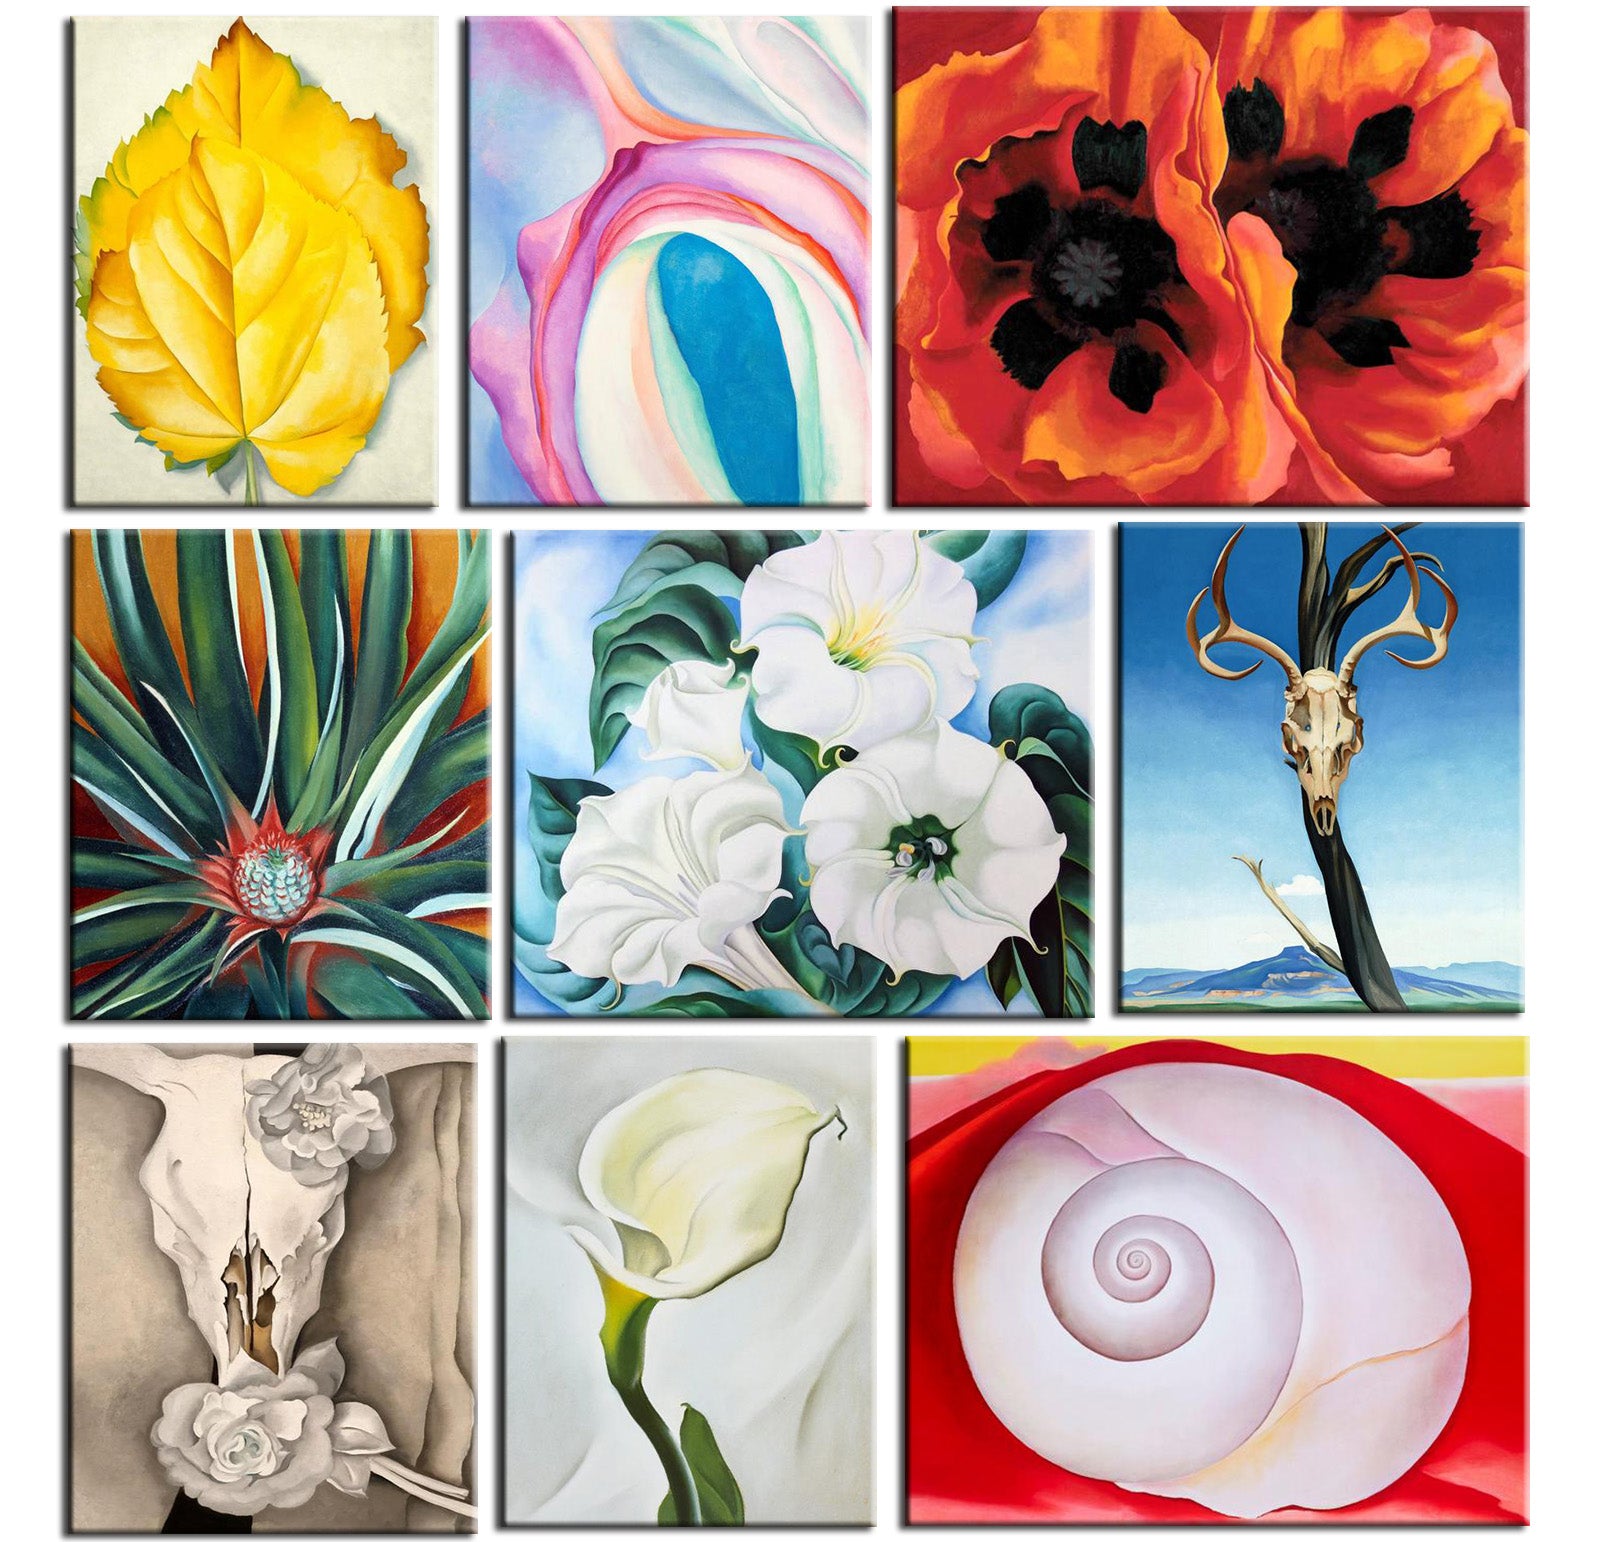 Ren personale hierarki Set of 10 Best of Georgia O'Keeffe Paintings - Poster Paper (12 x 17  inches) each by Georgia O'Keeffe | Buy Posters, Frames, Canvas & Digital  Art Prints | Small, Compact, Medium and Large Variants